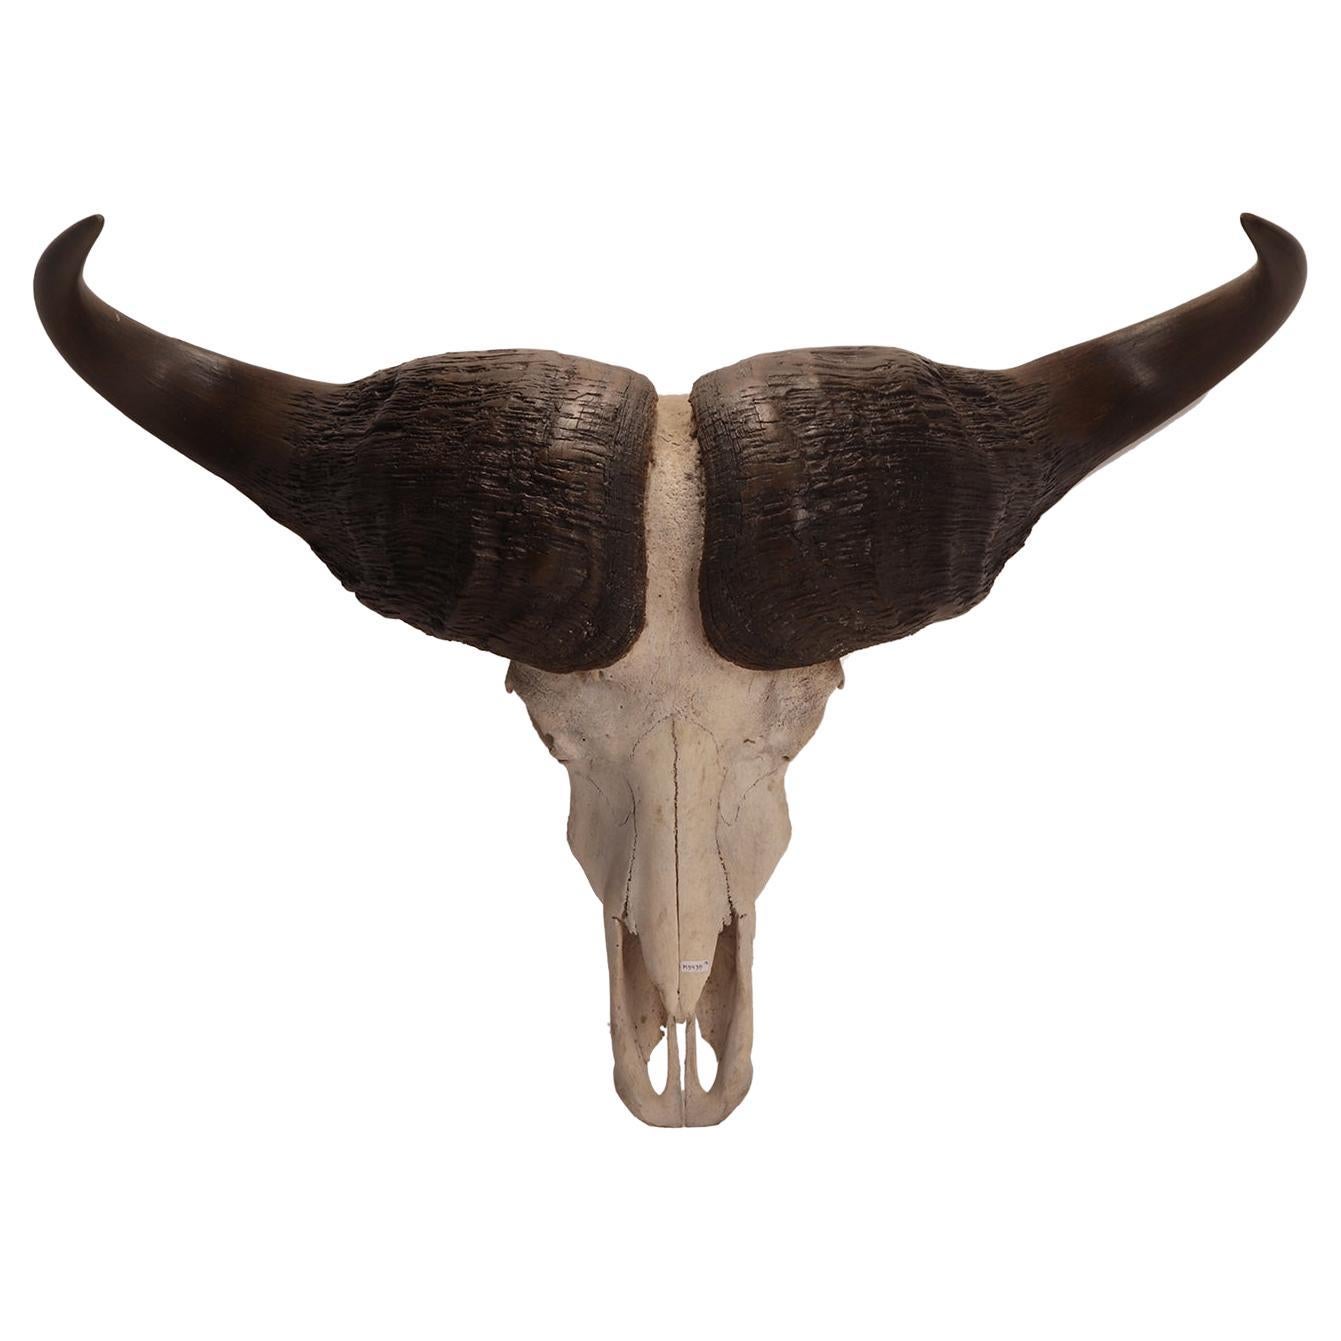 Natural Specimen a Trophy of a Bufalo Skull, Africa, 1890